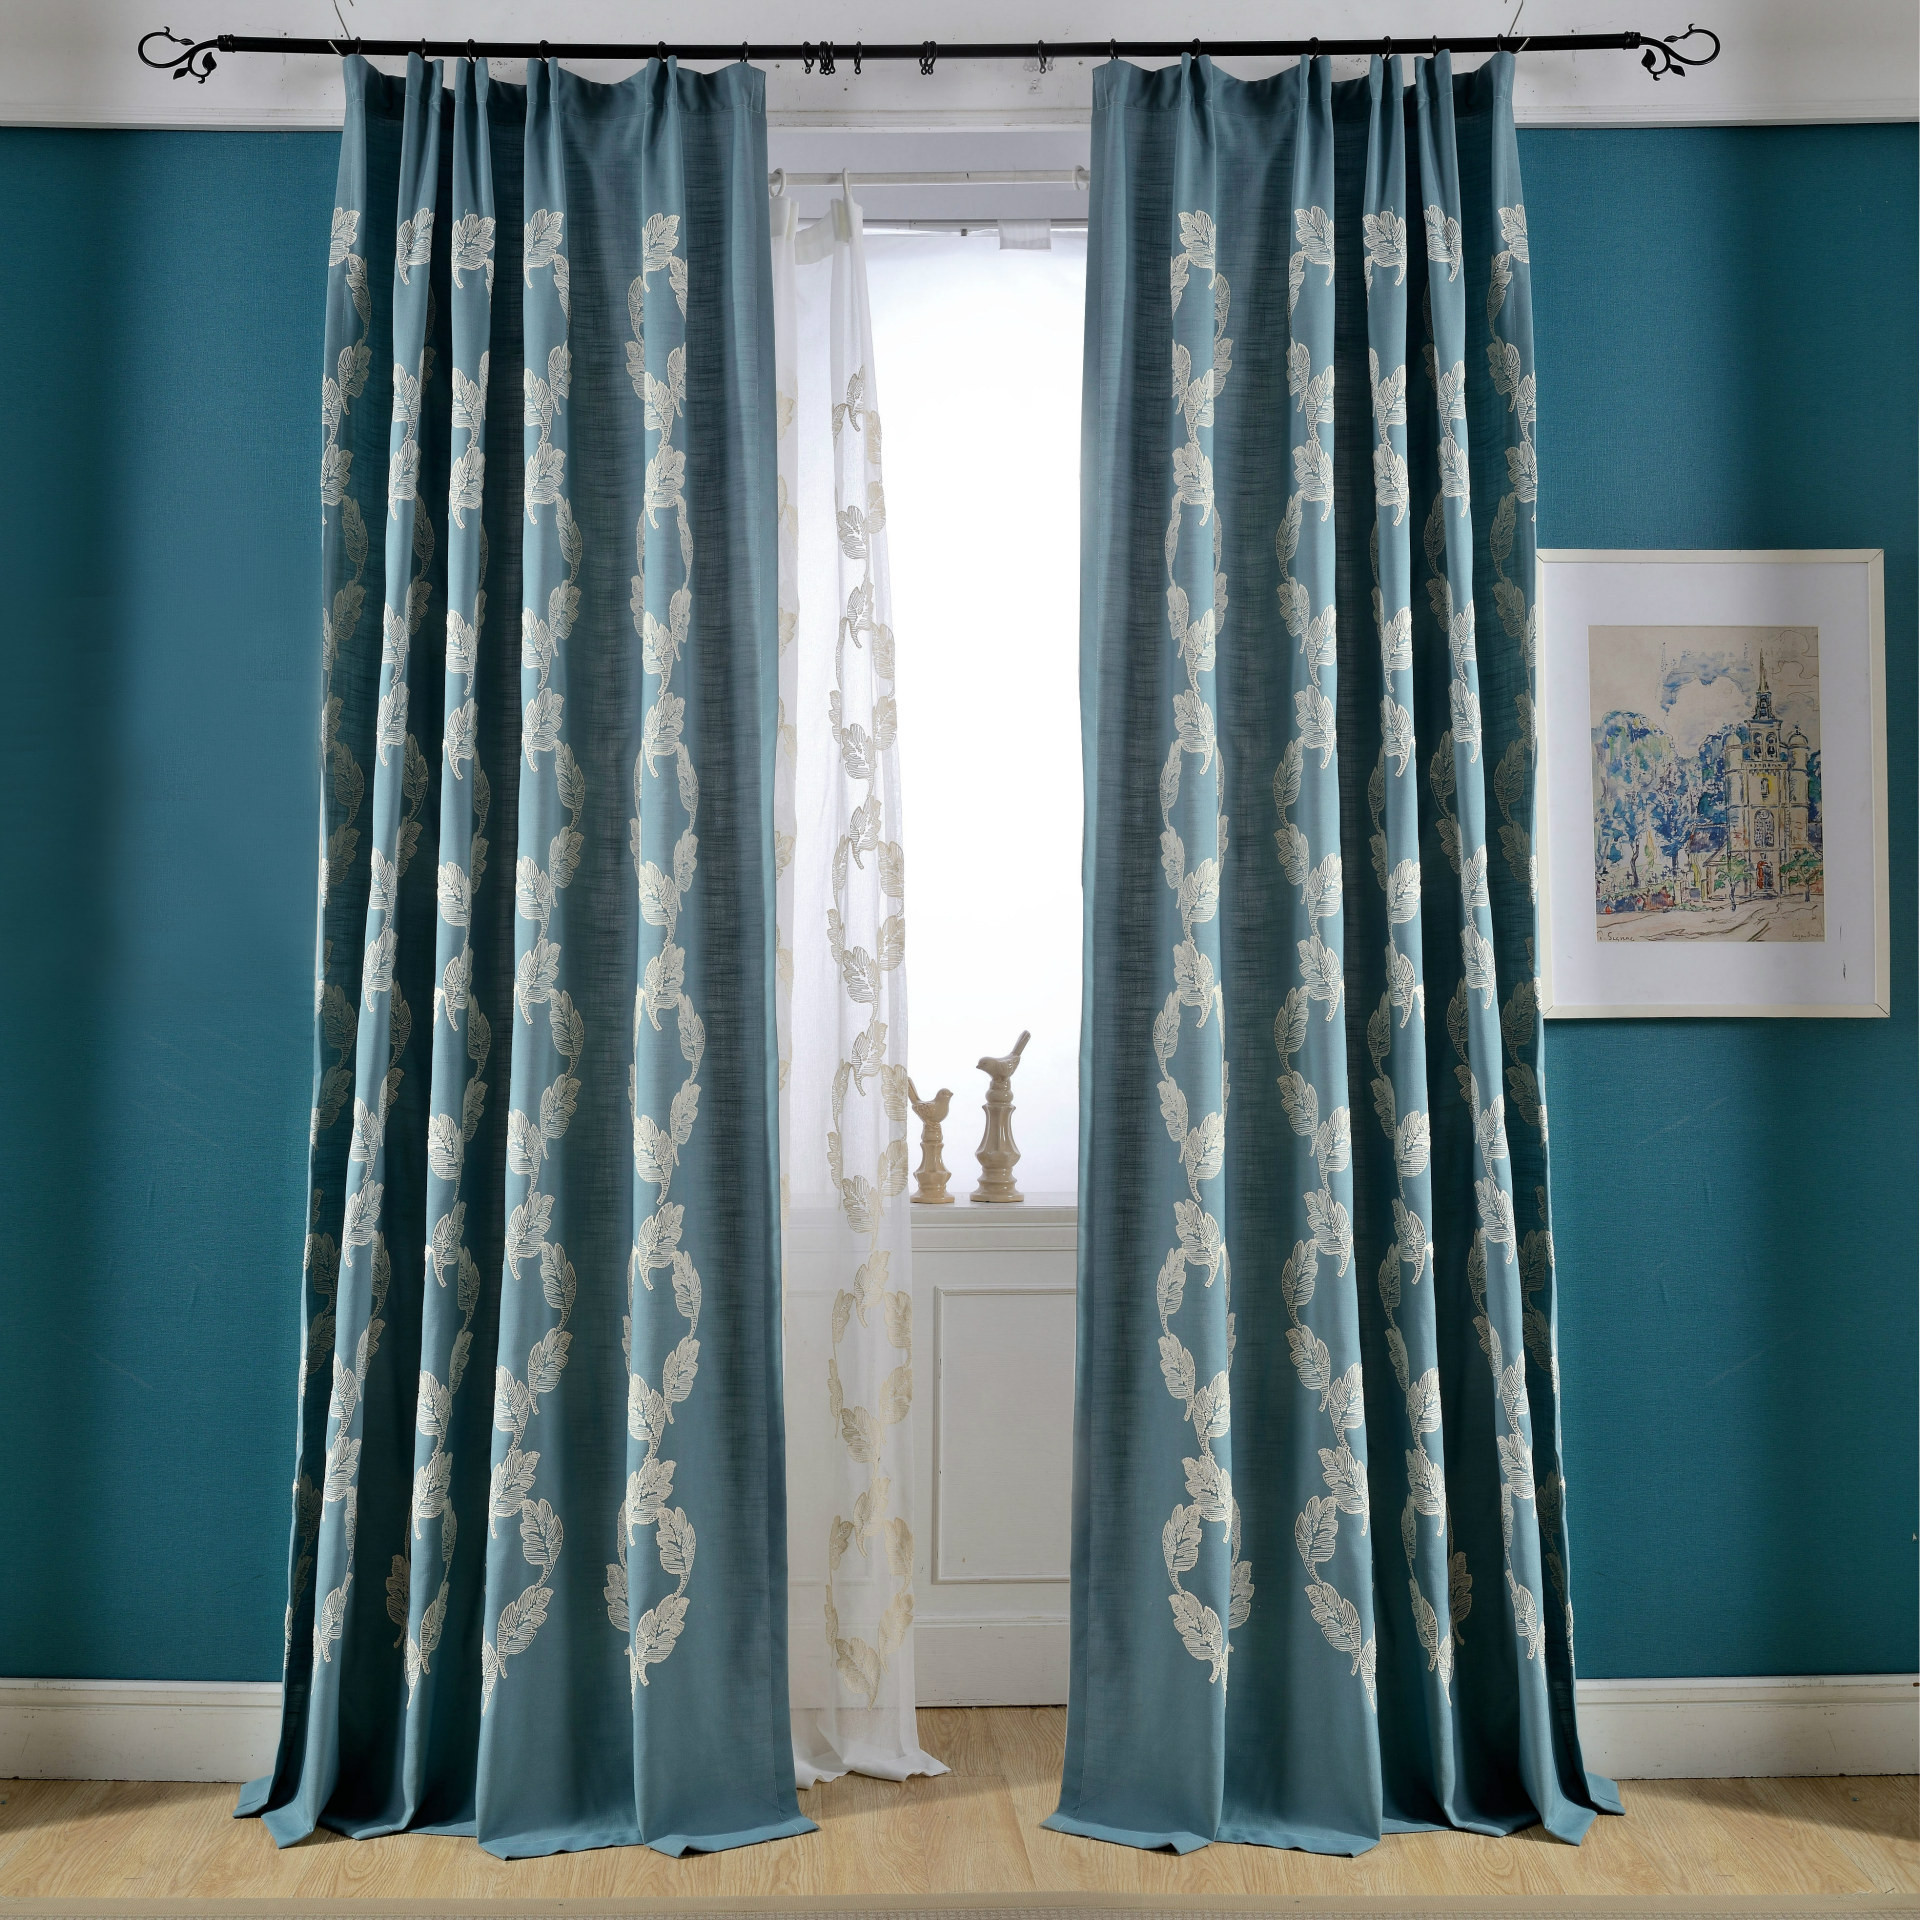 Country Curtains For Living Room
 Blue Leaf Embroidery Linen Cotton Blend Country Curtains